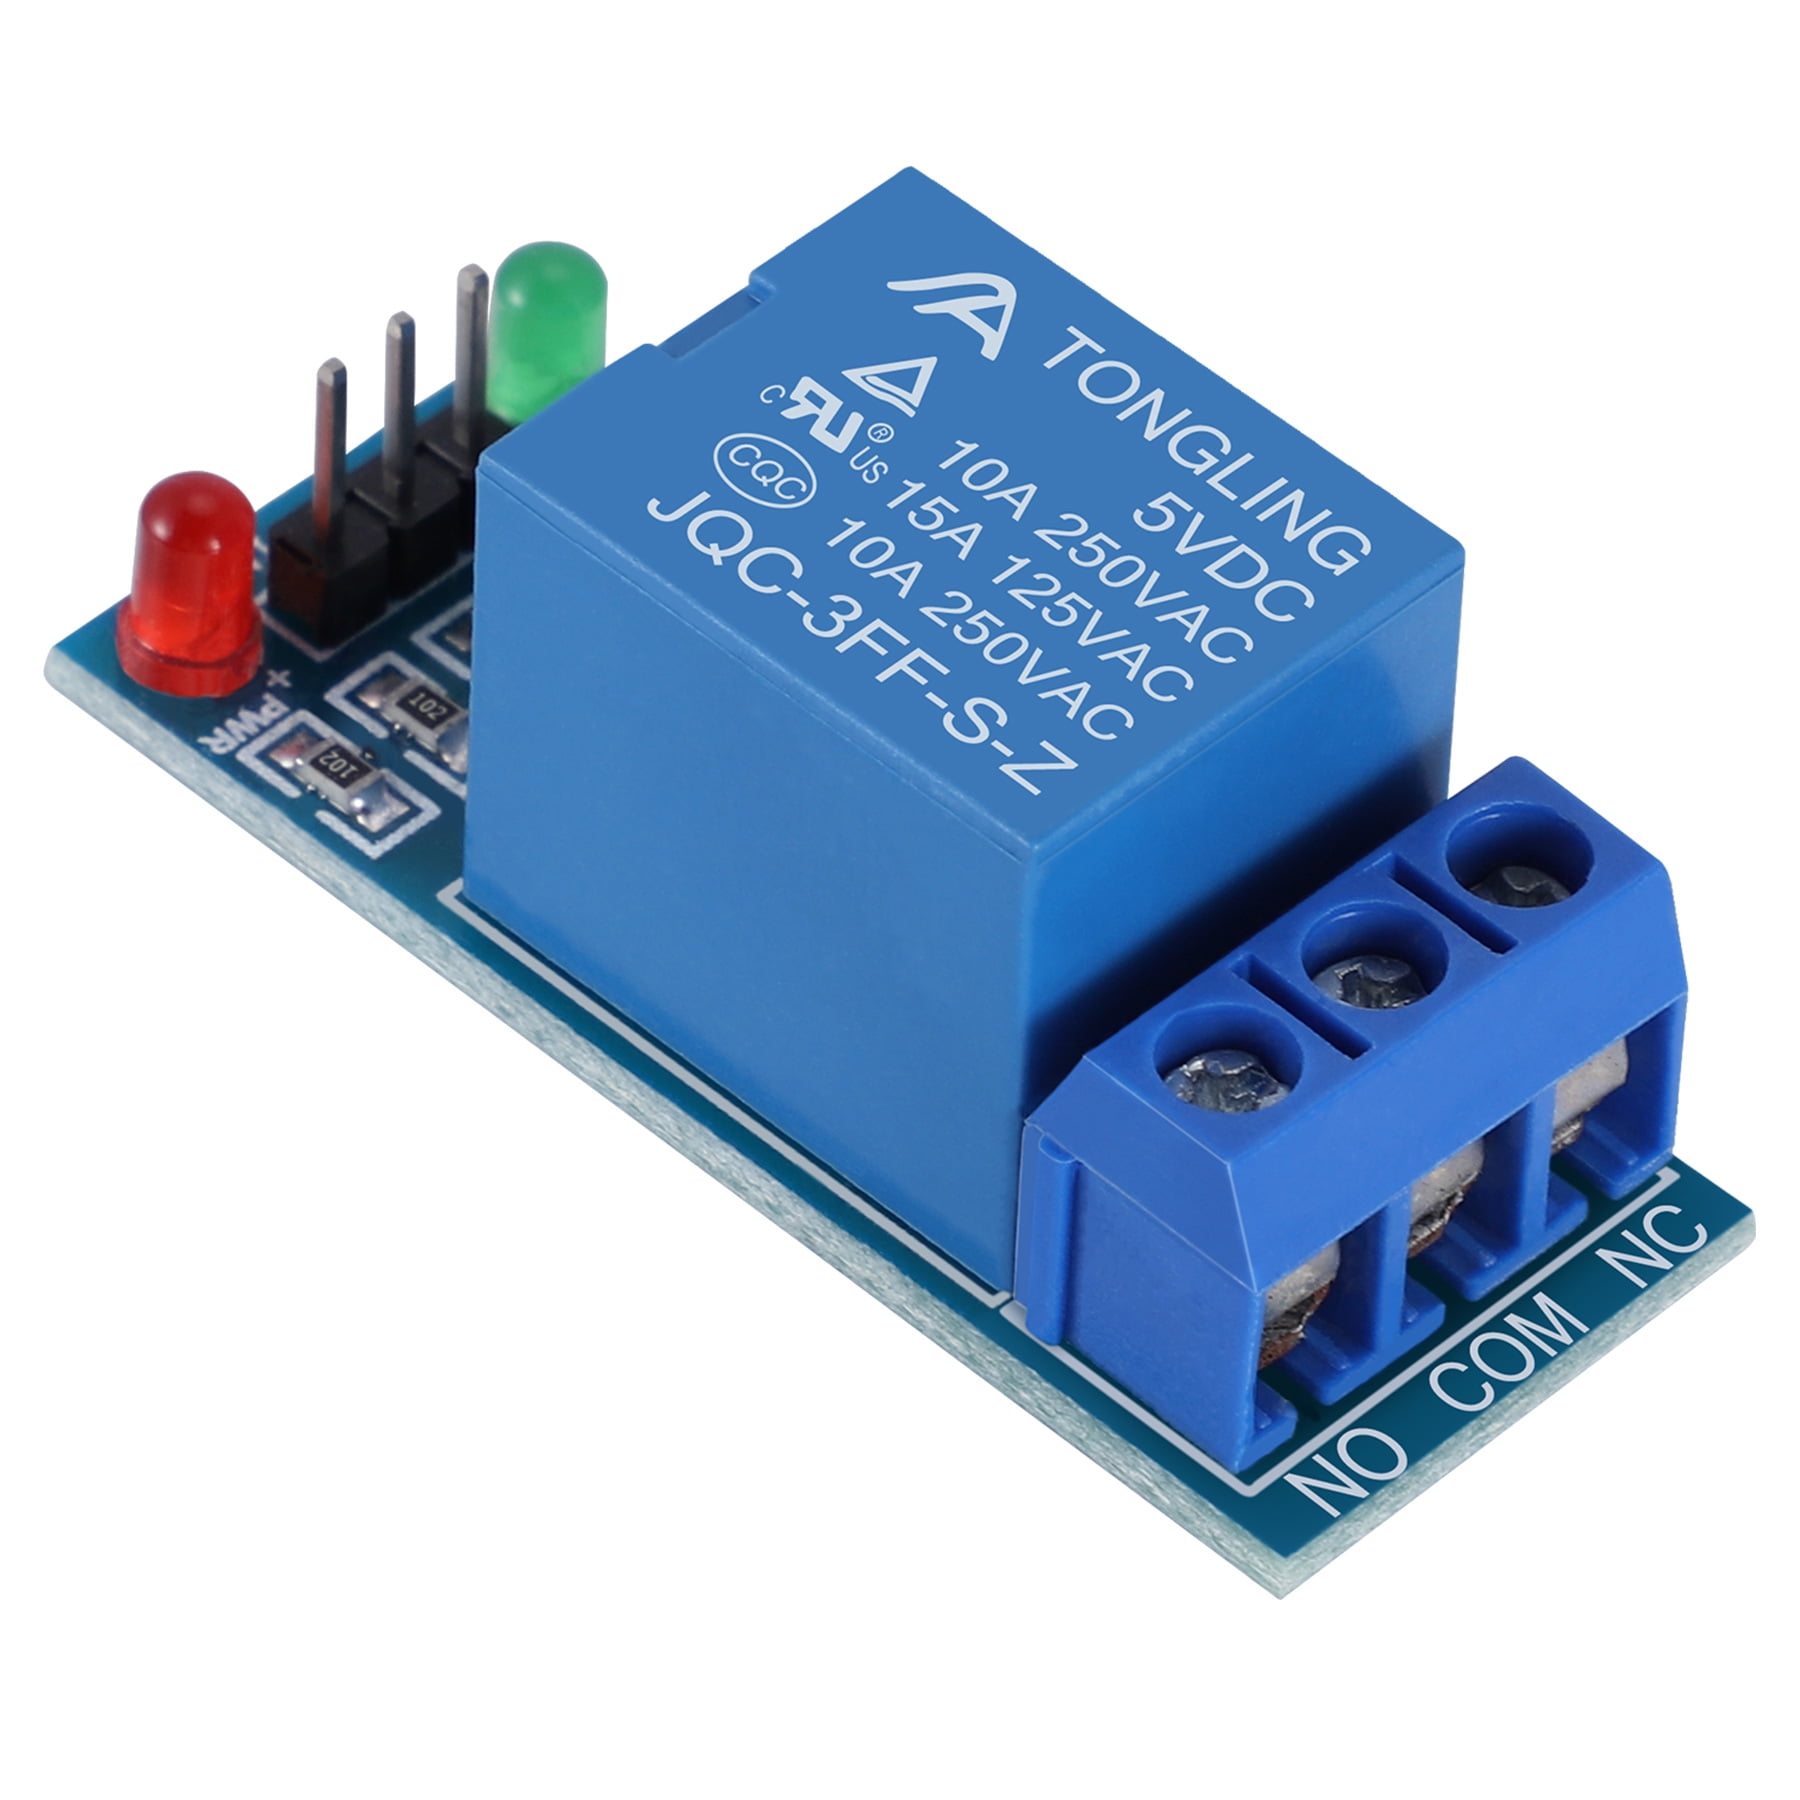 12V 1/2/4/8/16 Channel Relay Module With optocoupler For PIC AVR DSP ARM Arduino 